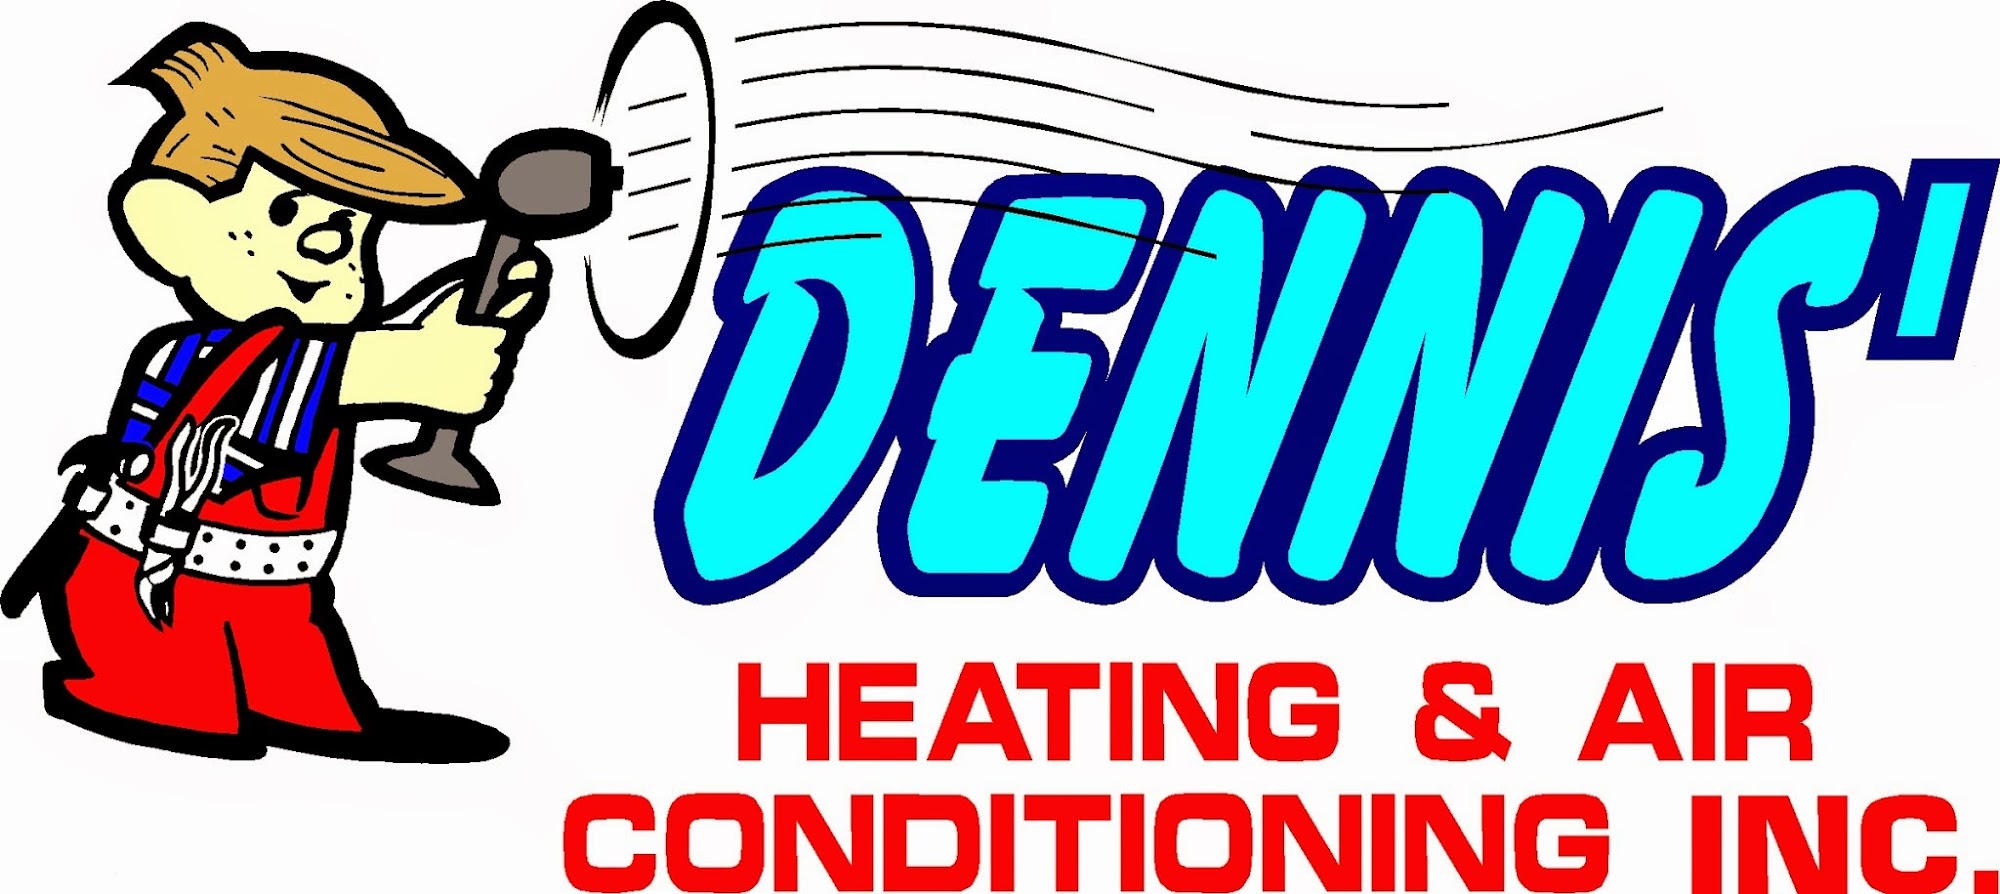 Dennis' Heating & Air Conditioning, Inc.